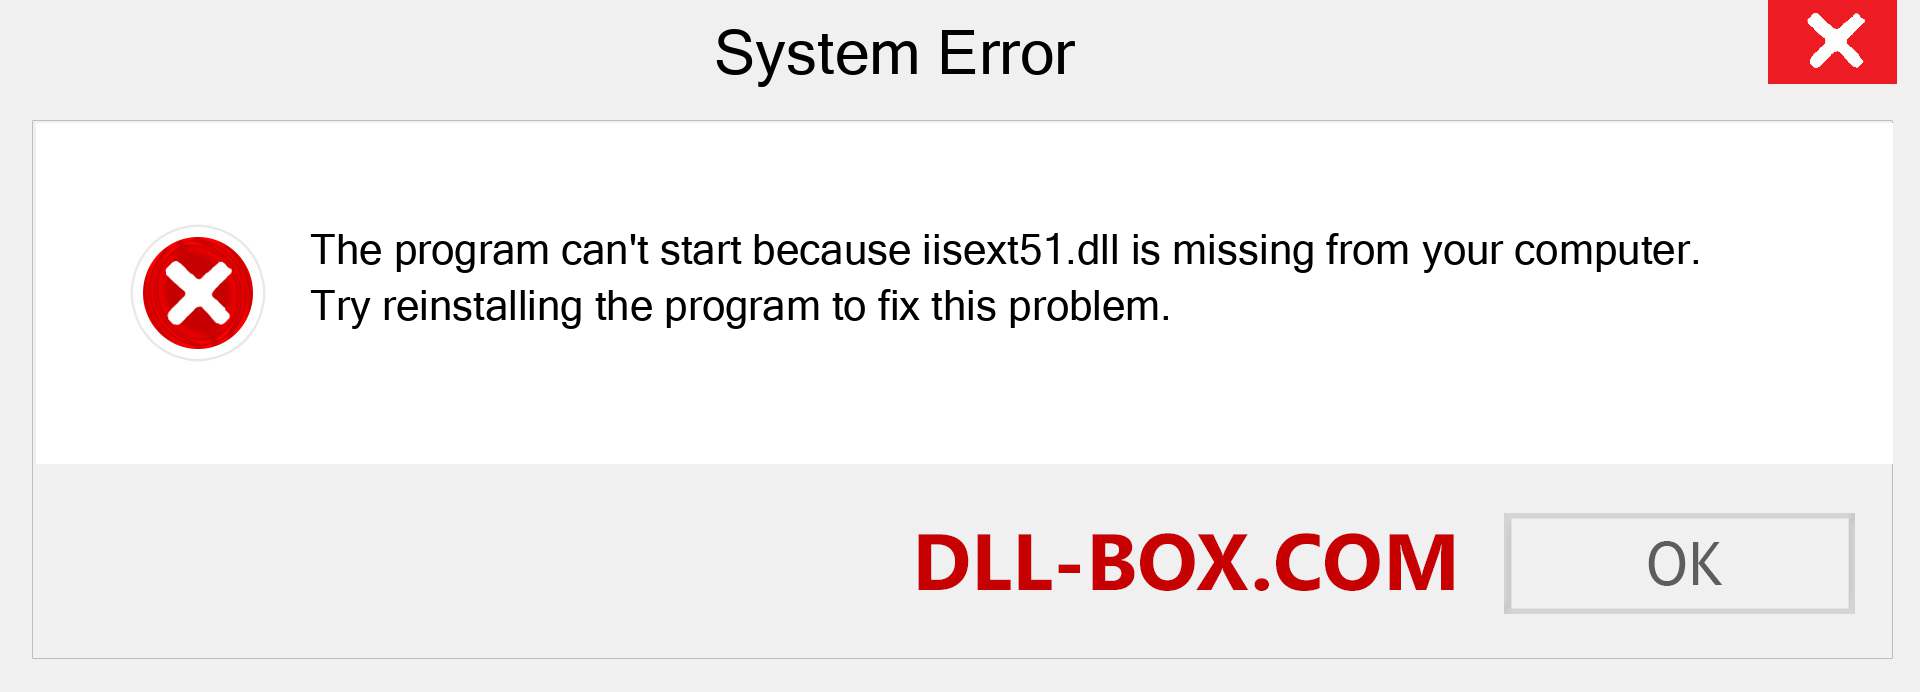  iisext51.dll file is missing?. Download for Windows 7, 8, 10 - Fix  iisext51 dll Missing Error on Windows, photos, images